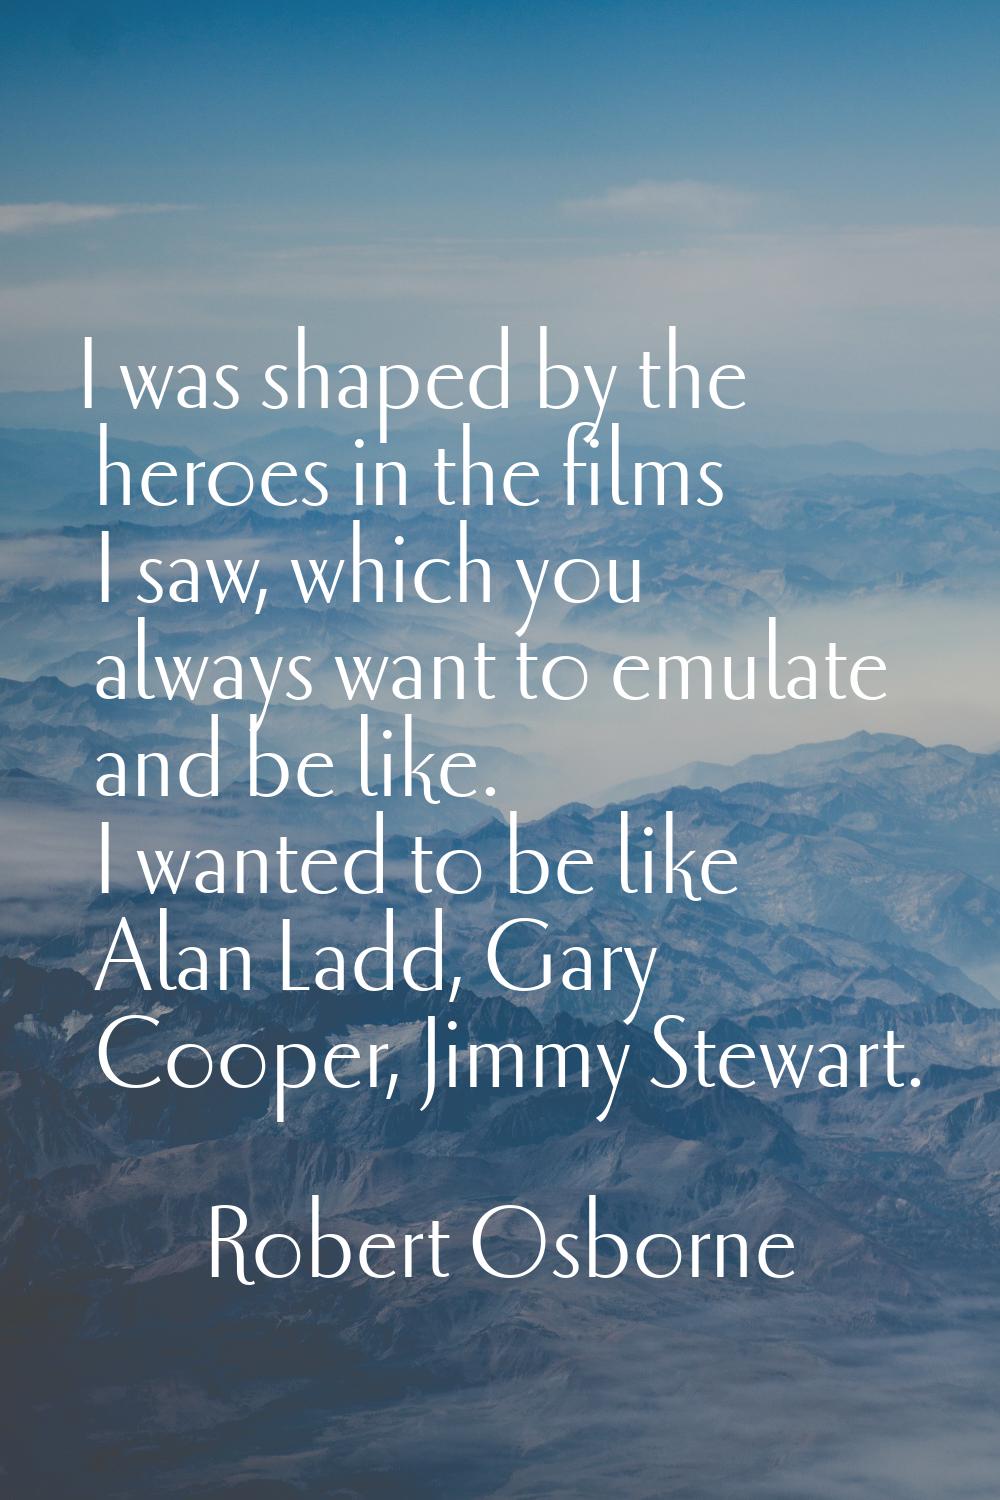 I was shaped by the heroes in the films I saw, which you always want to emulate and be like. I want